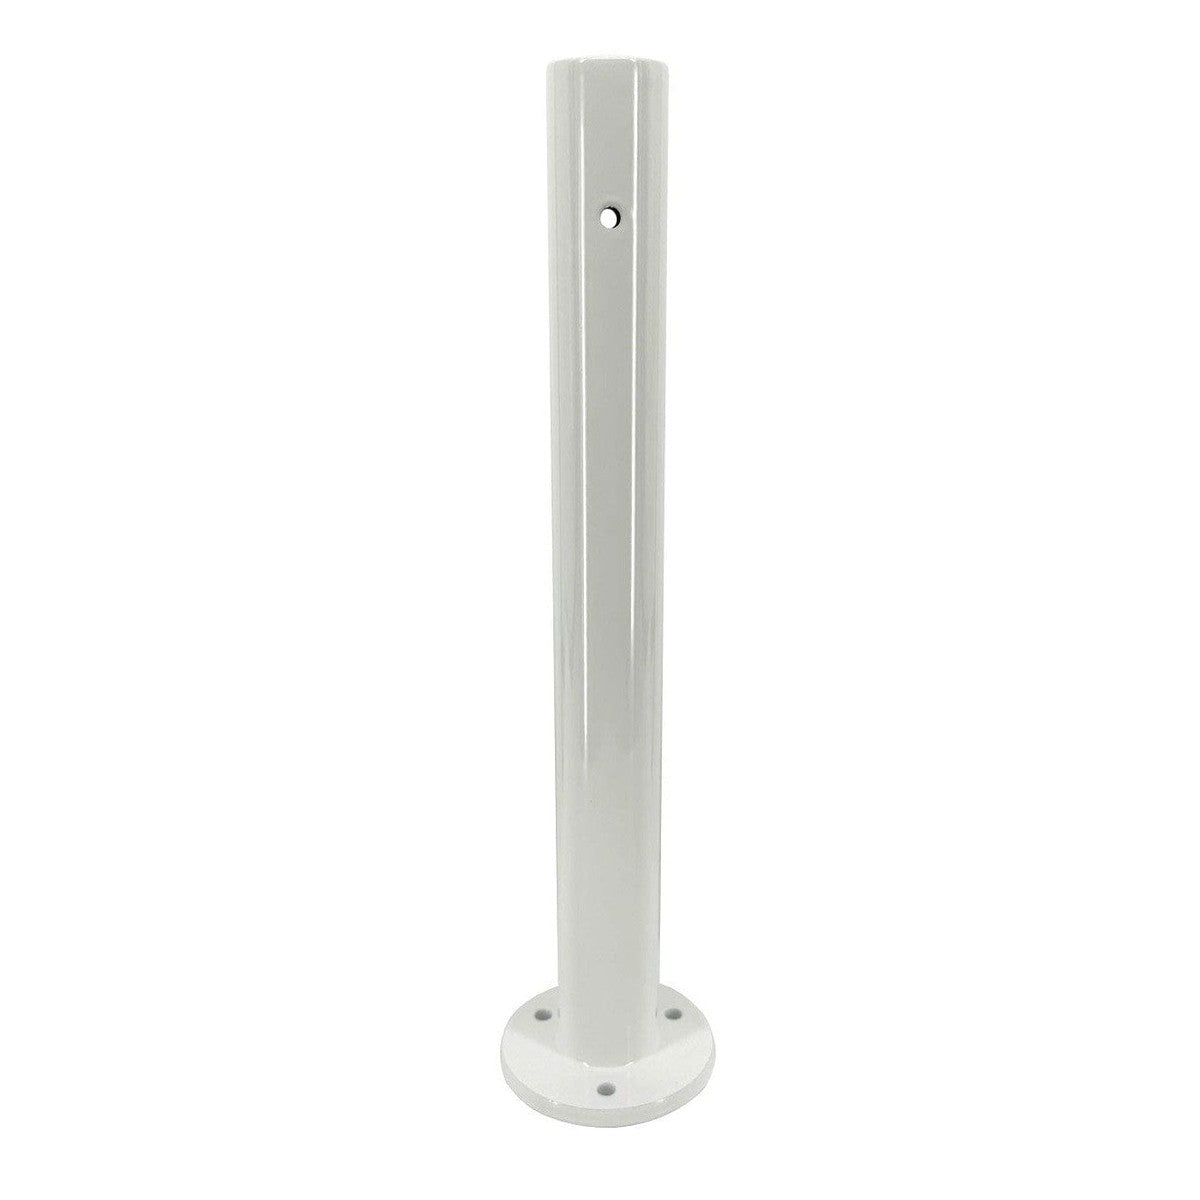 Seaview Qualifies for Free Shipping Seaview 36" Light Post Requires Light Bar Top #SVLTP36